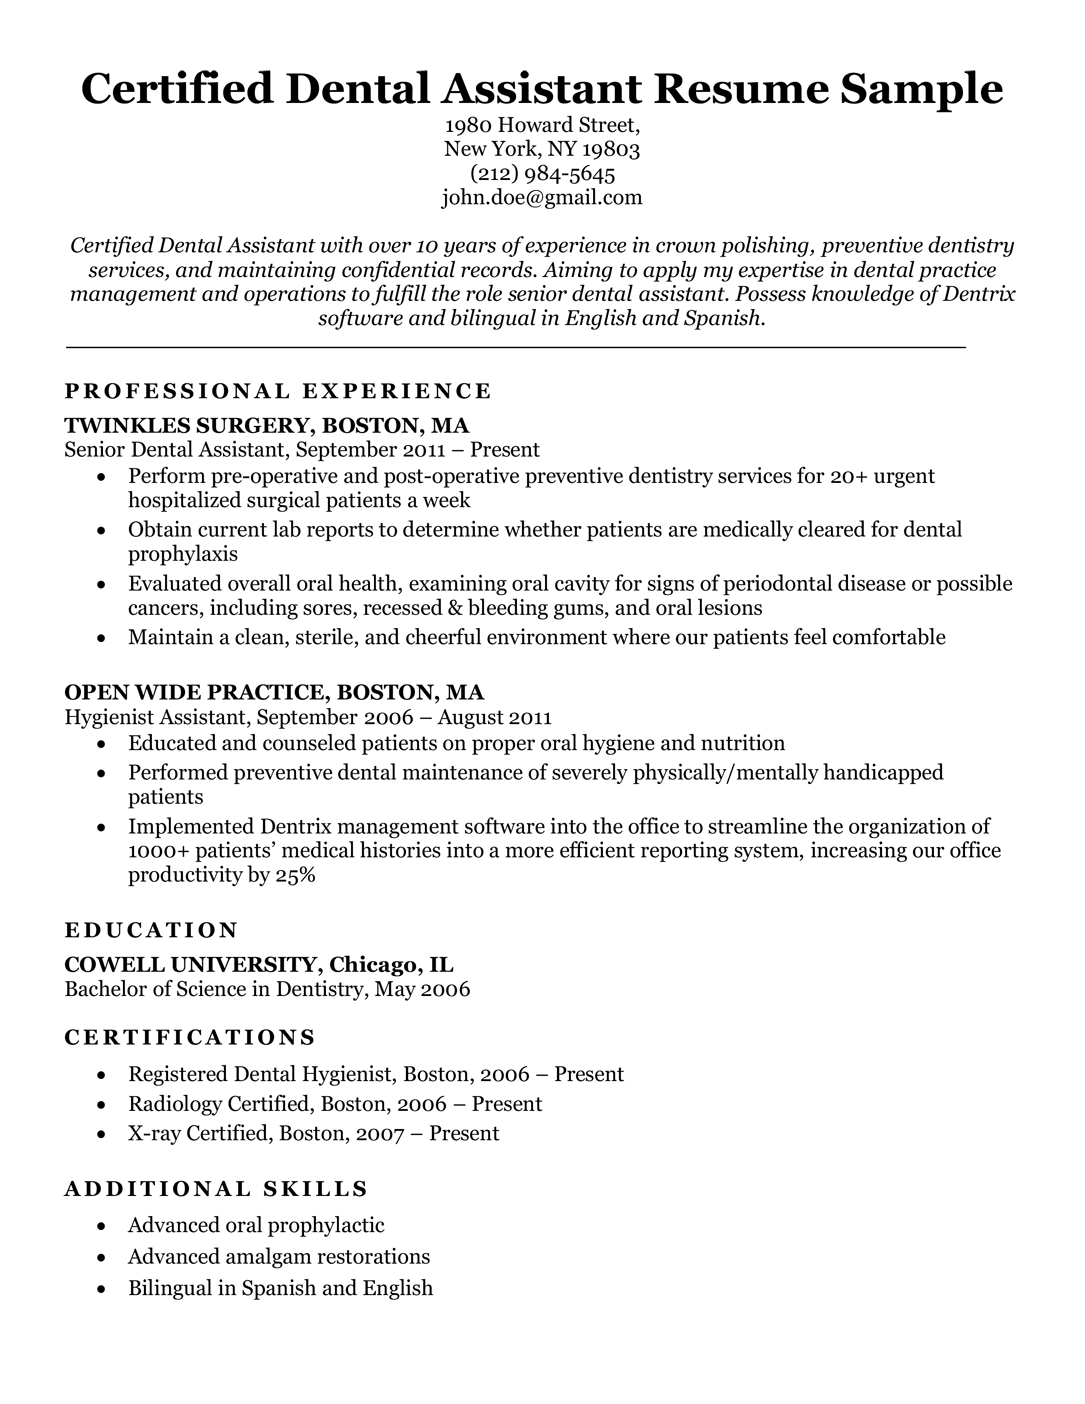 dental assistant resume summary examples